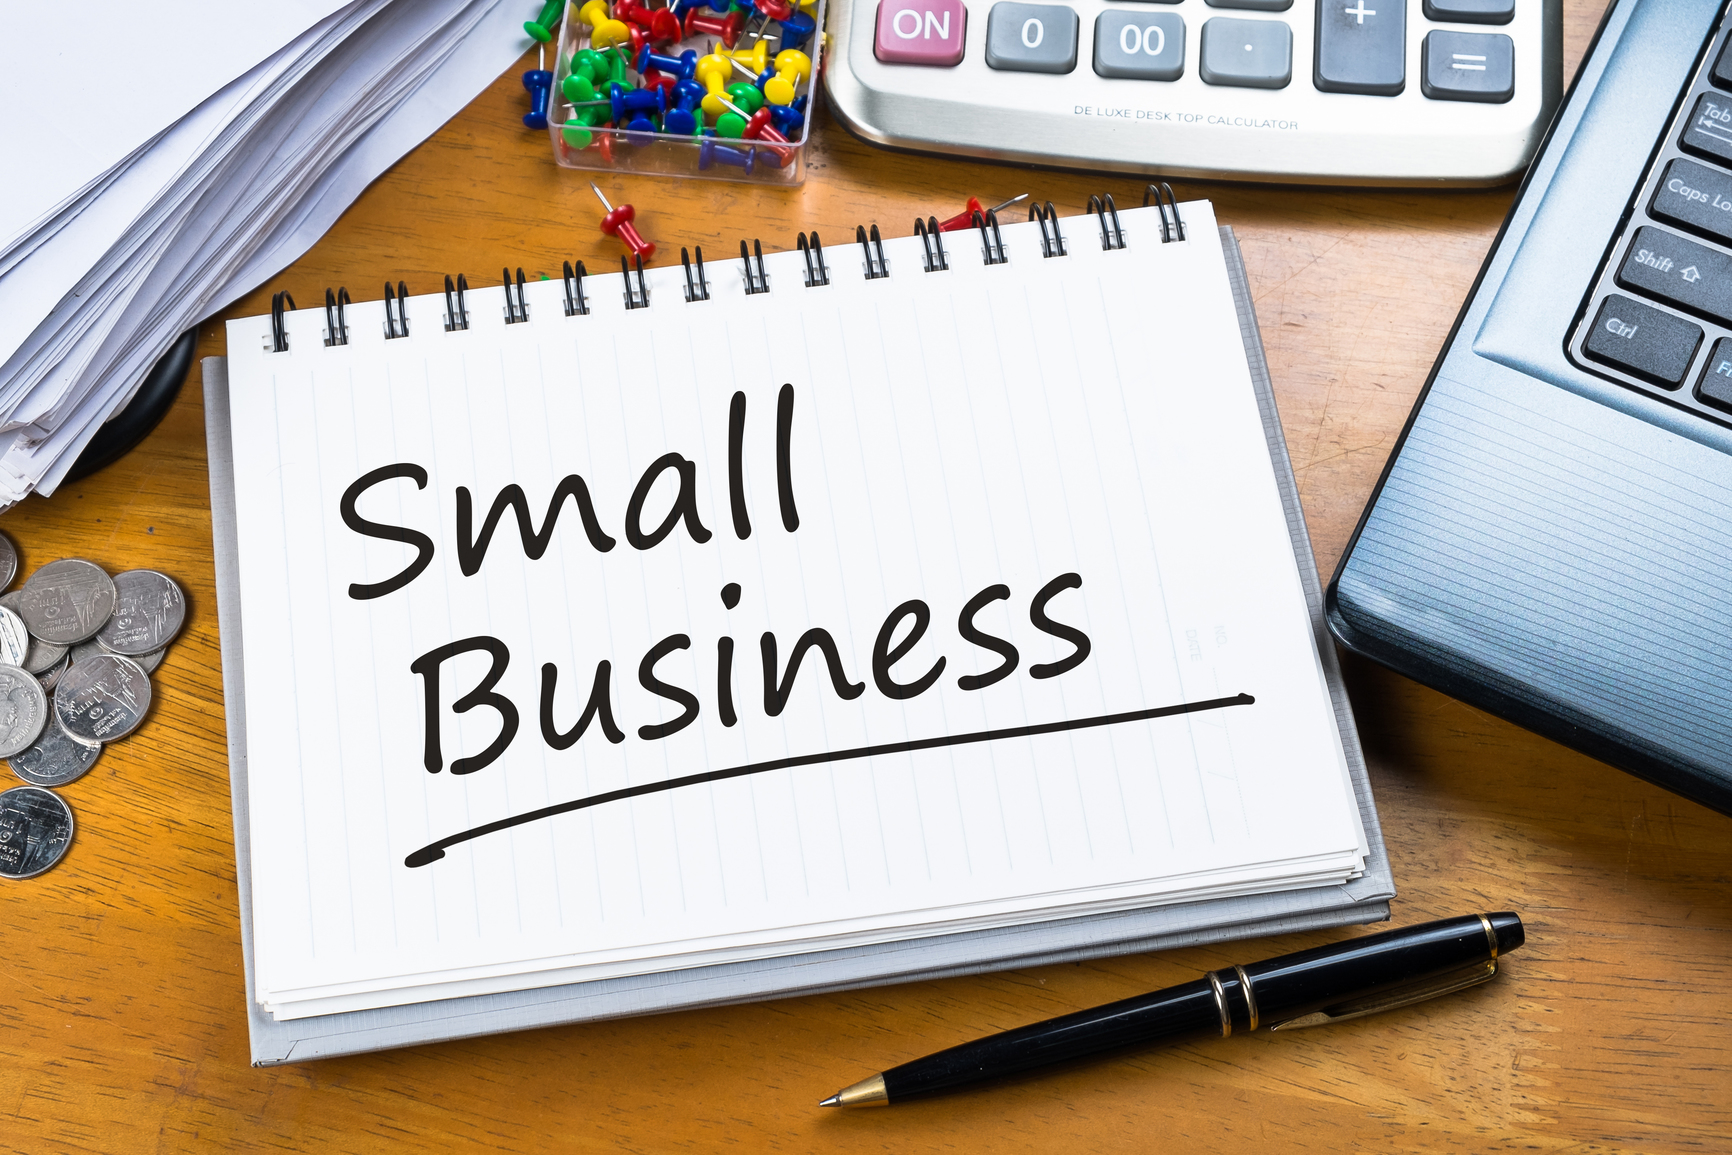 Small Business and the 2017-18 Budget